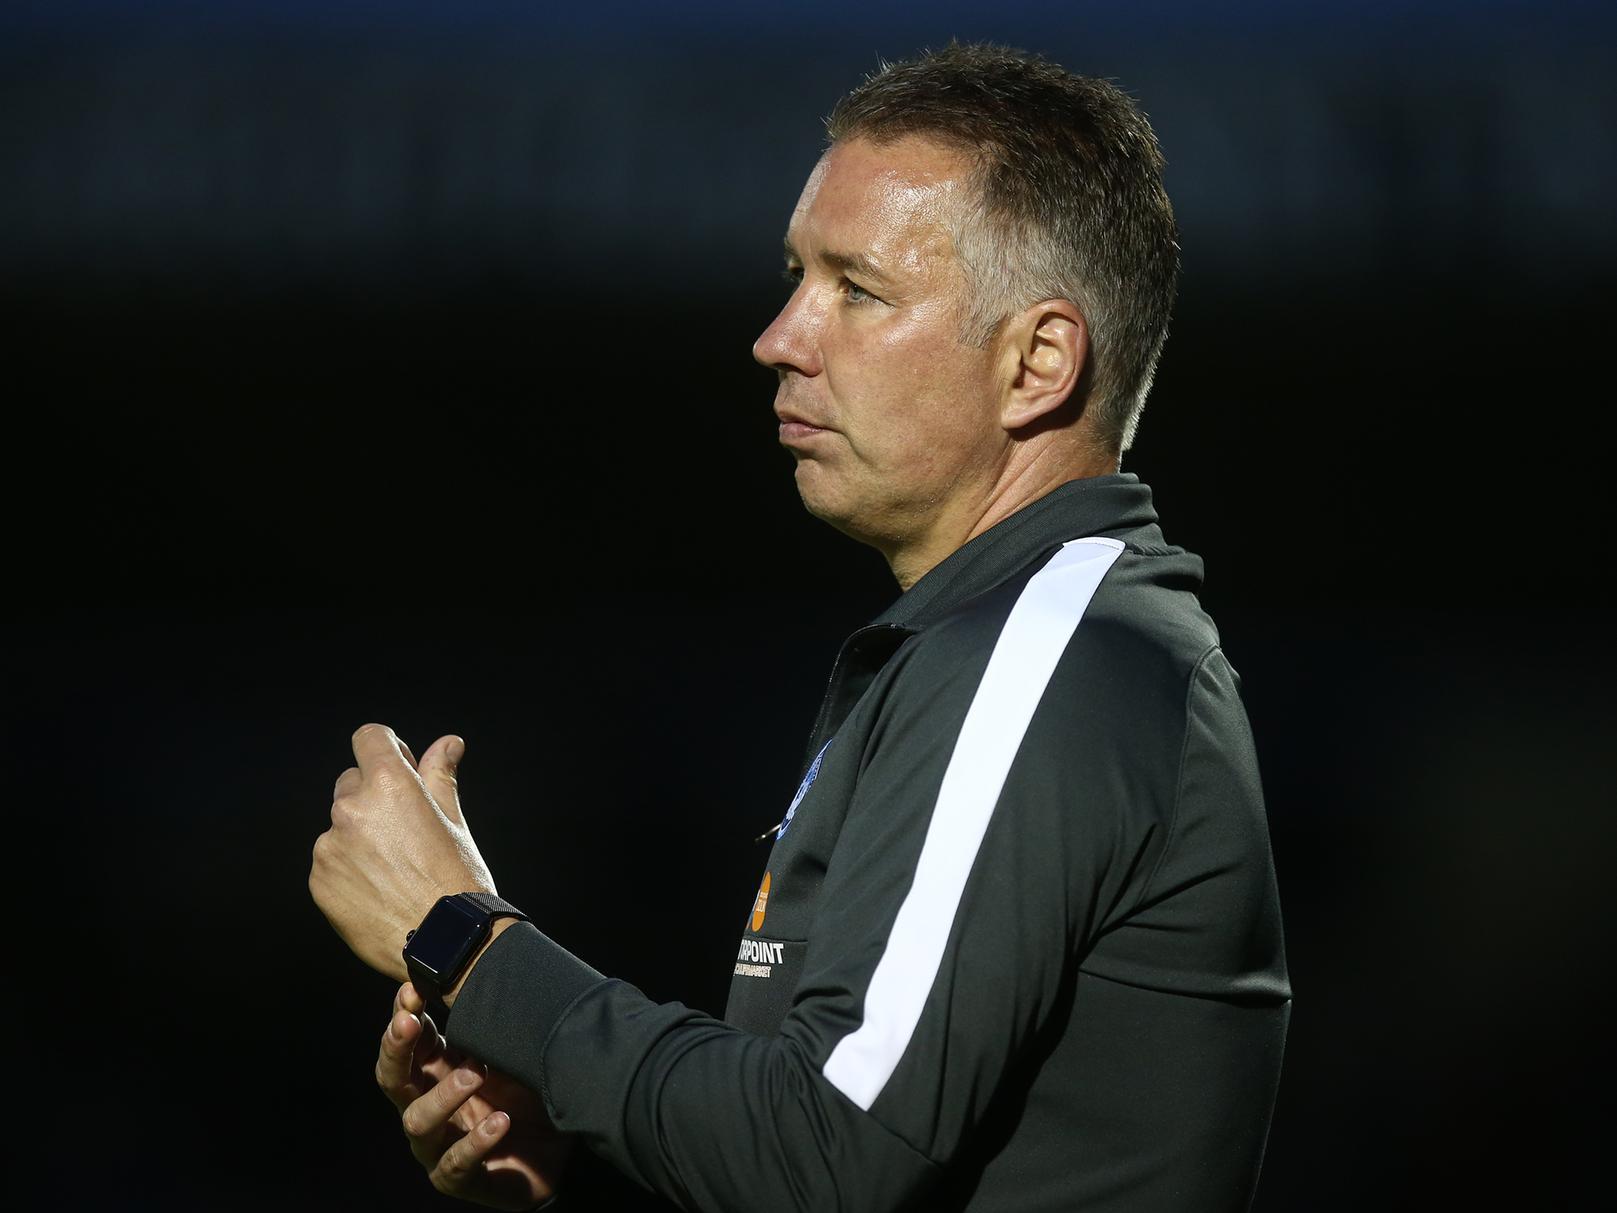 A credible point against Bristol Rovers saw Fergusons Peterborough United move into the automatic promotion spots.